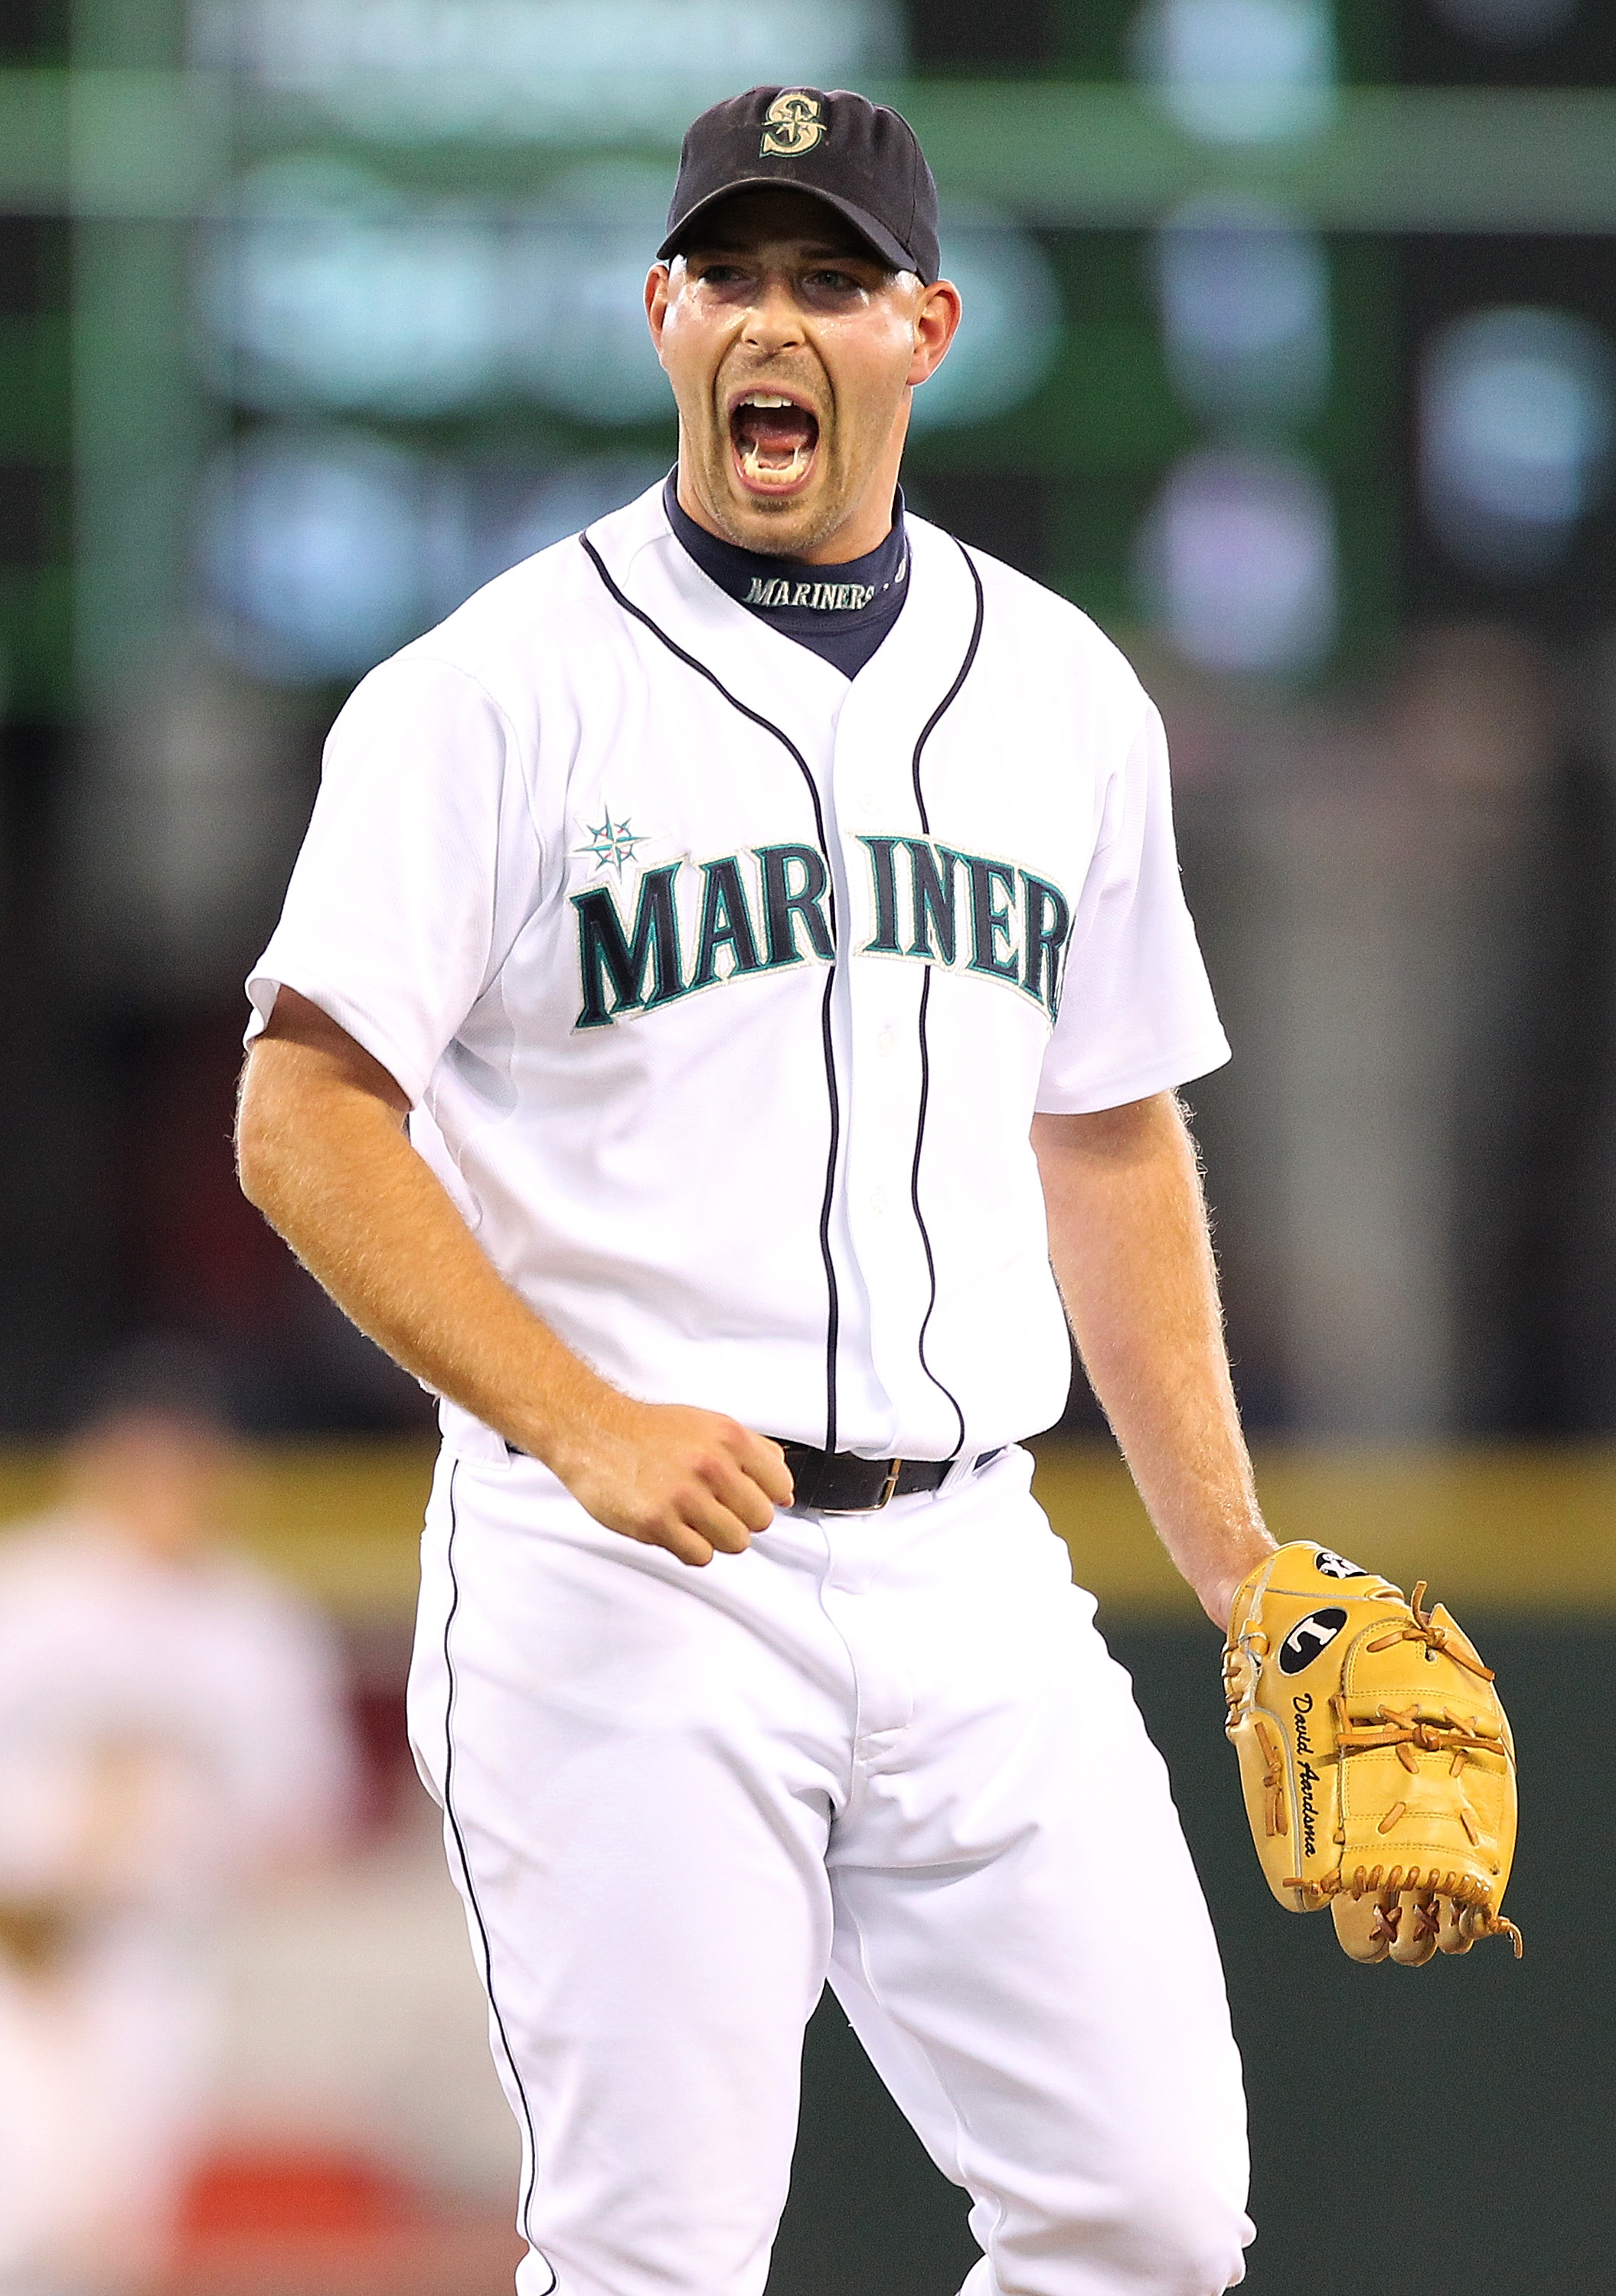 SEATTLE - SEPTEMBER 19:  Closing pitcher David Aardsma #53 of the Seattle Mariners reacts after defeating the Texas Rangers 2-1 at Safeco Field on September 19, 2010 in Seattle, Washington. (Photo by Otto Greule Jr/Getty Images)